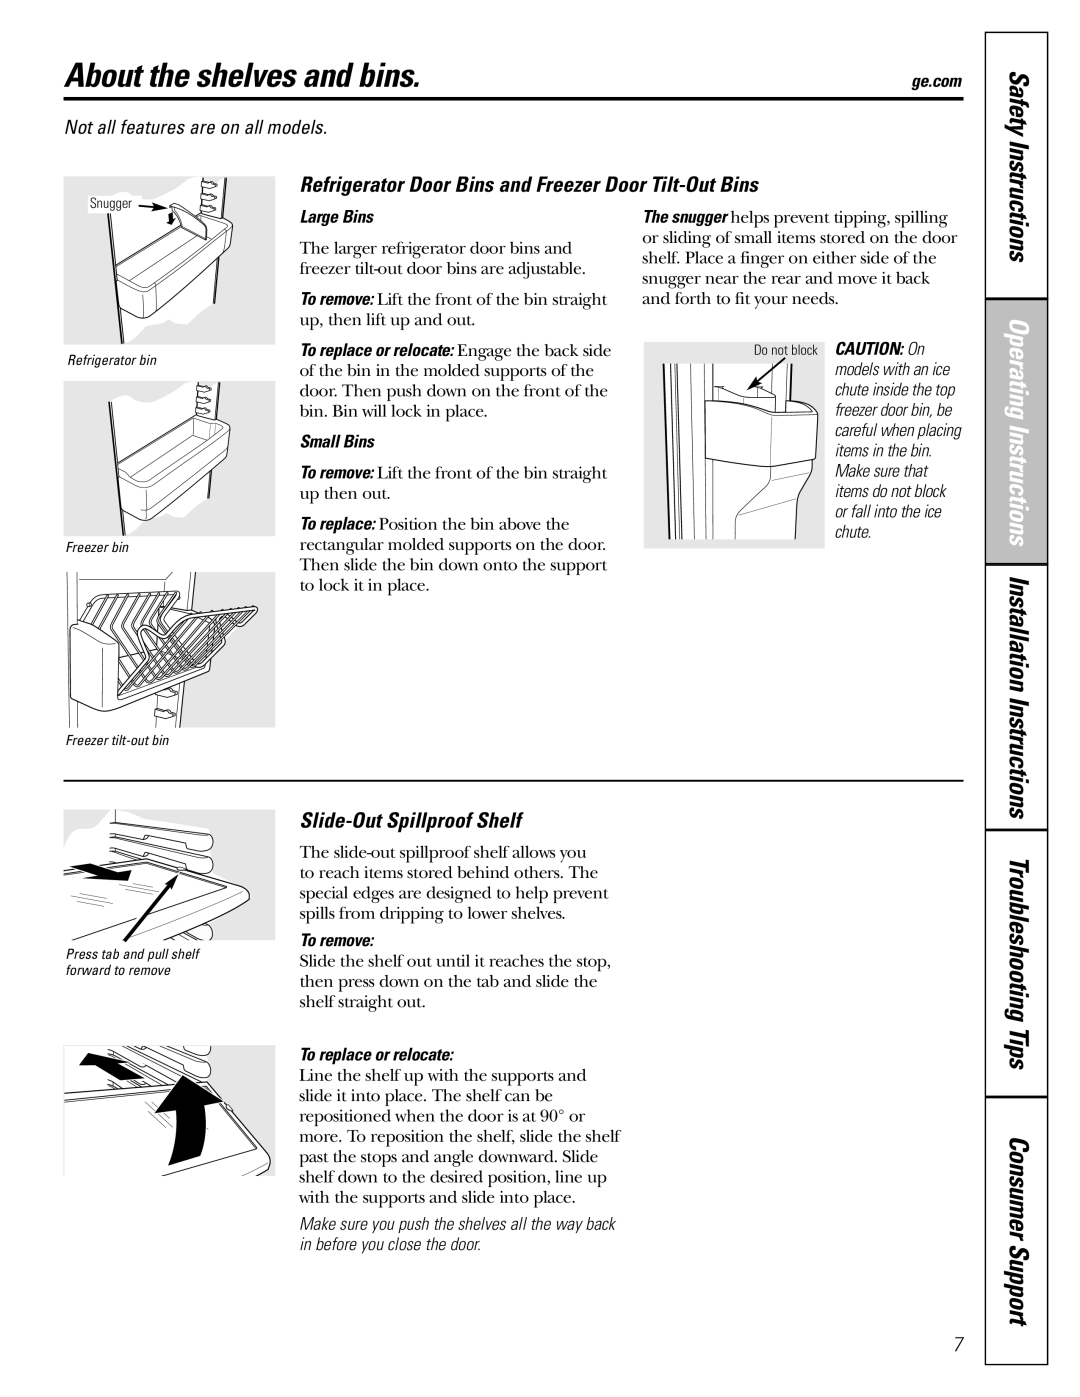 GE 22, 23, 25, 27 installation instructions About the shelves and bins, Safety, Slide-OutSpillproof Shelf 